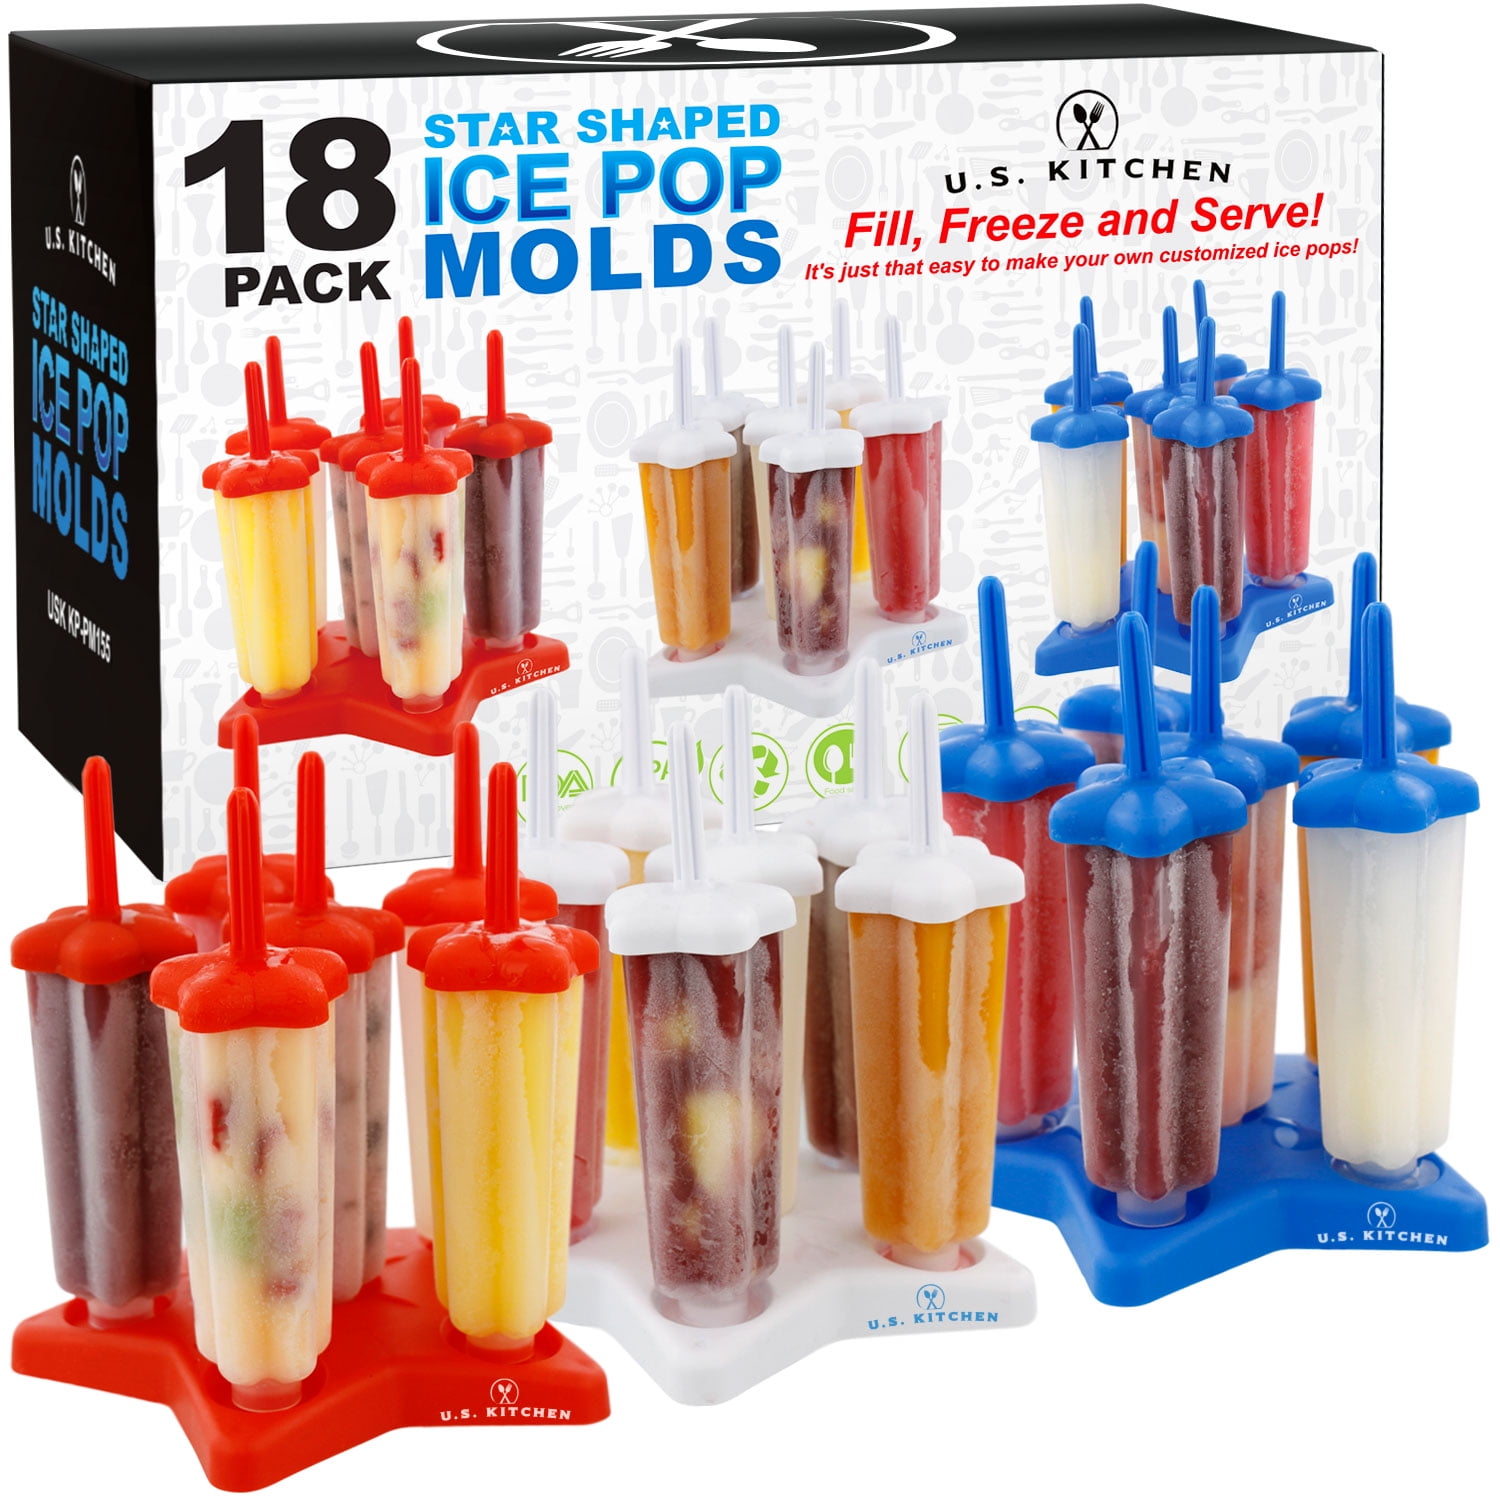 U.S. Kitchen Supply Jumbo Set of 18 Star Shaped Ice Pop Molds - Sets of 6 Red, 6 White & 6 Blue - Reusable USA Colored Ice Pop